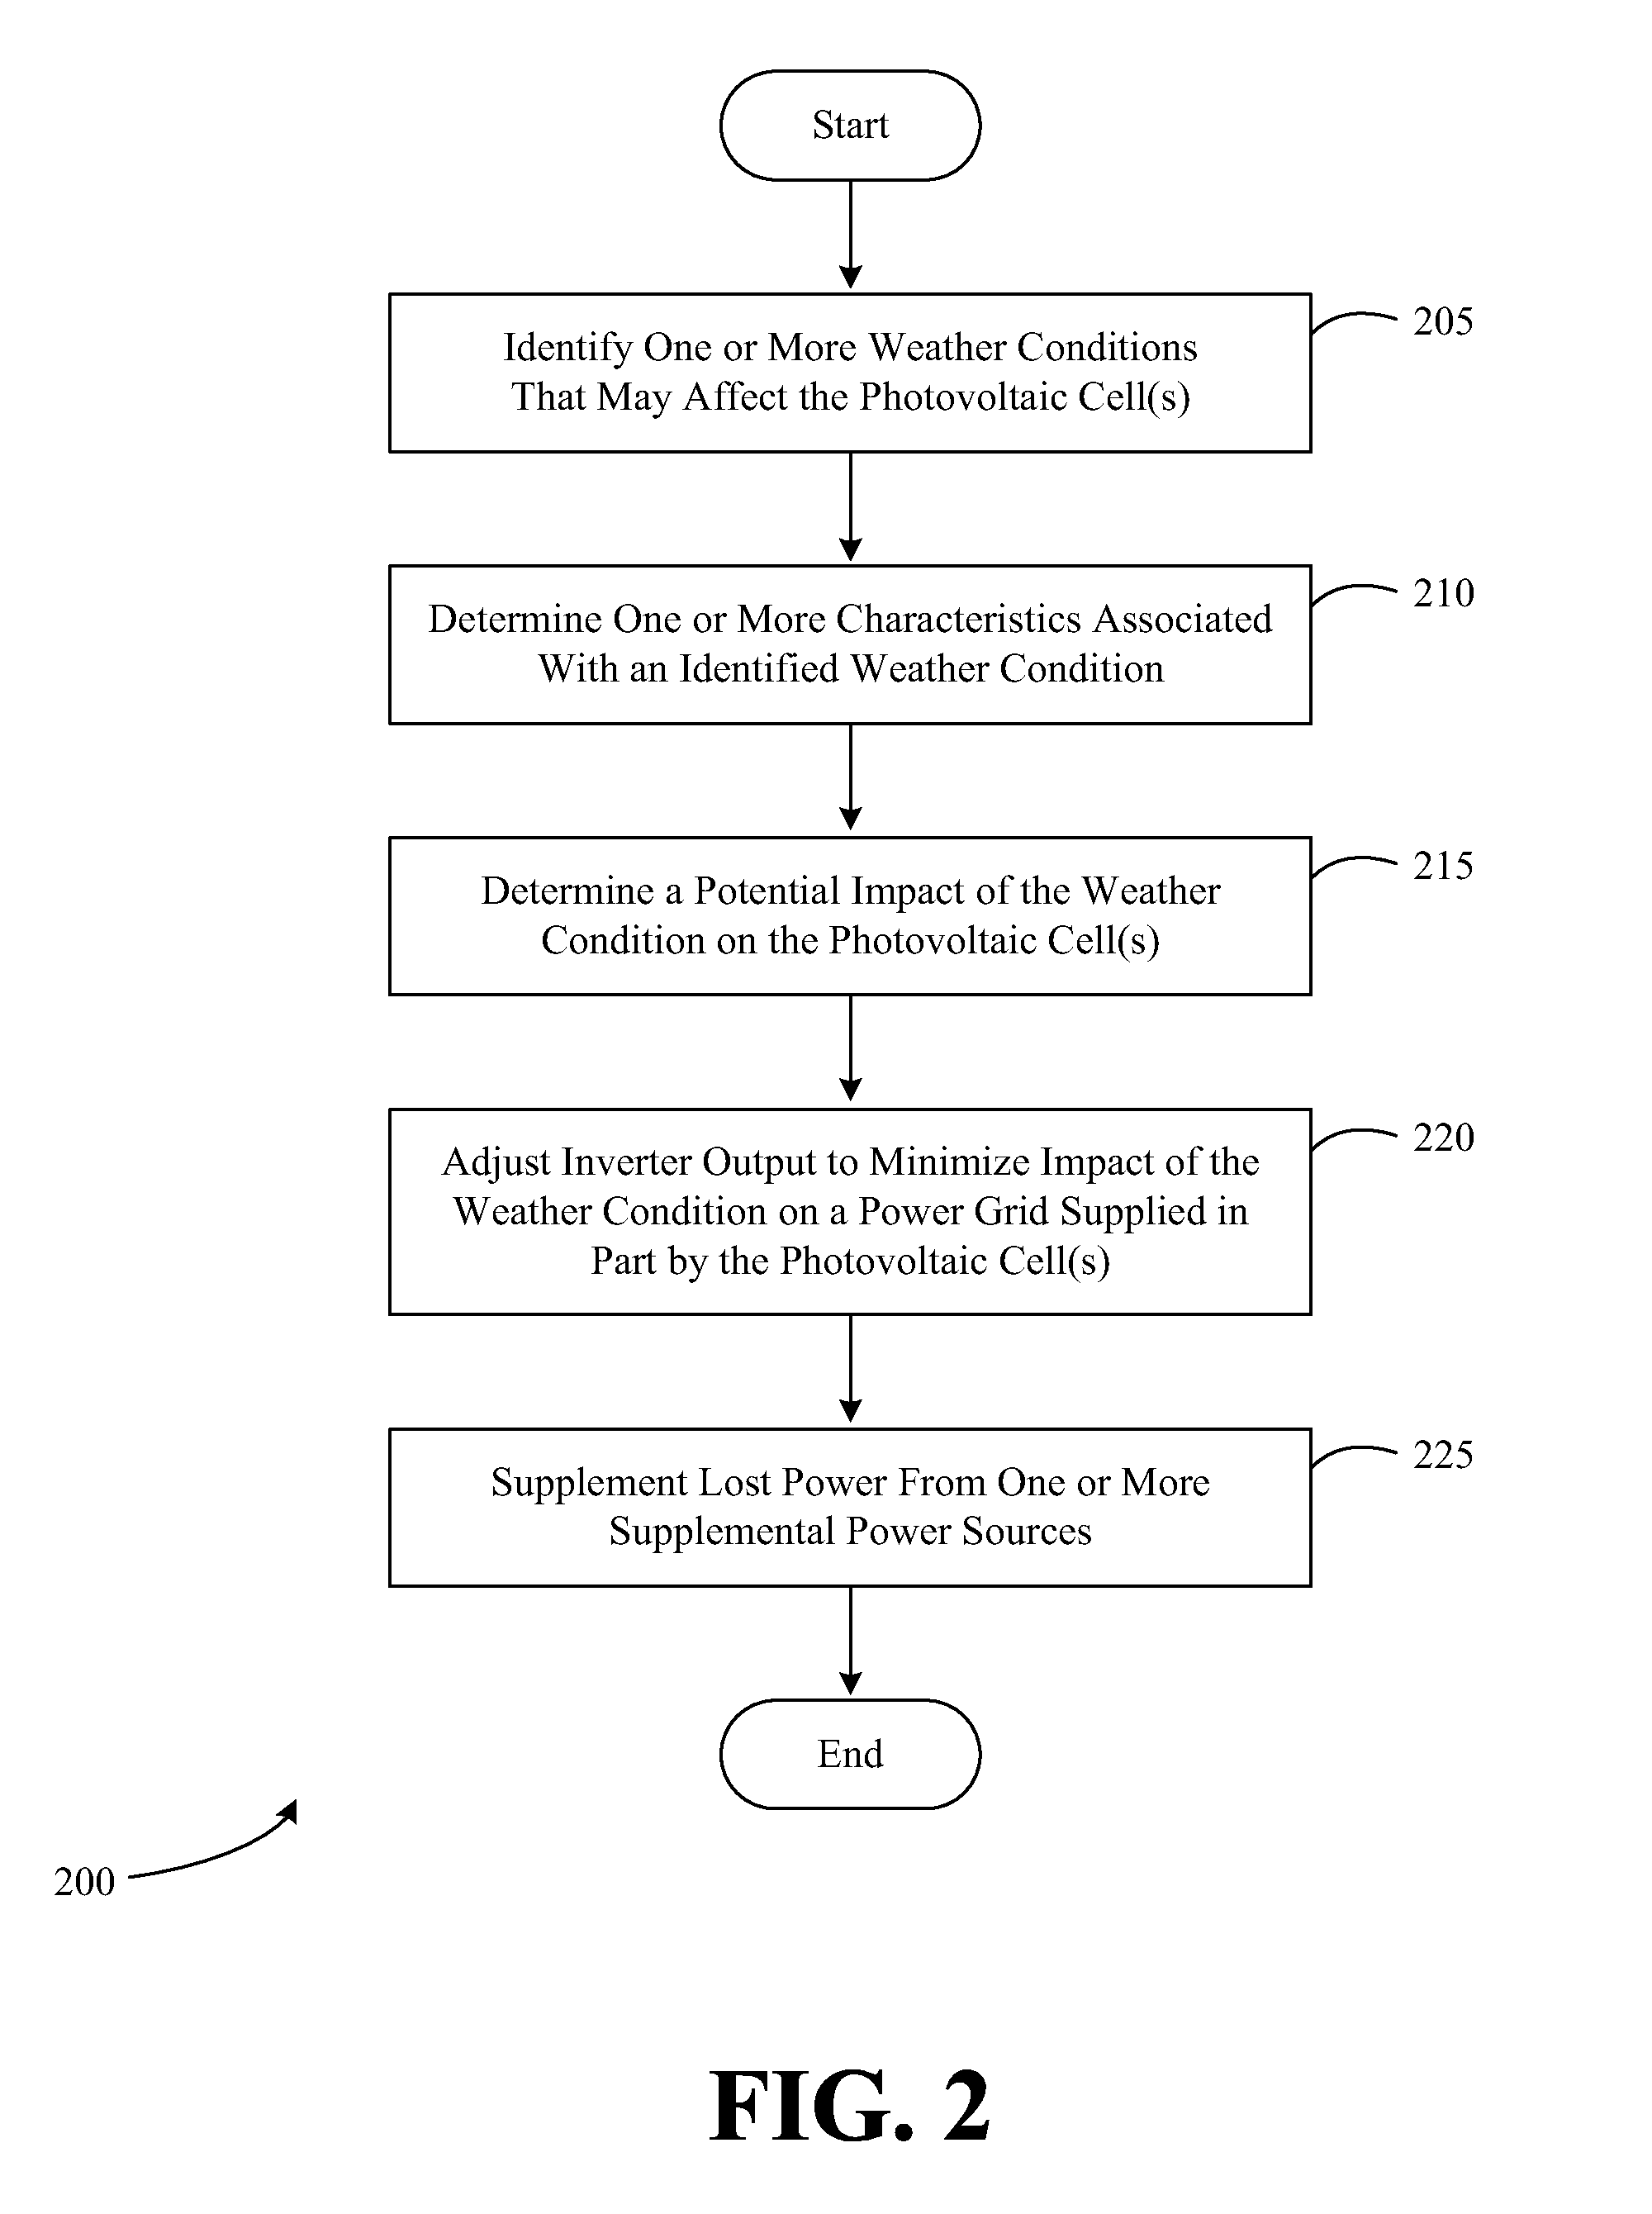 Systems and methods for interfacing renewable power sources to a power grid